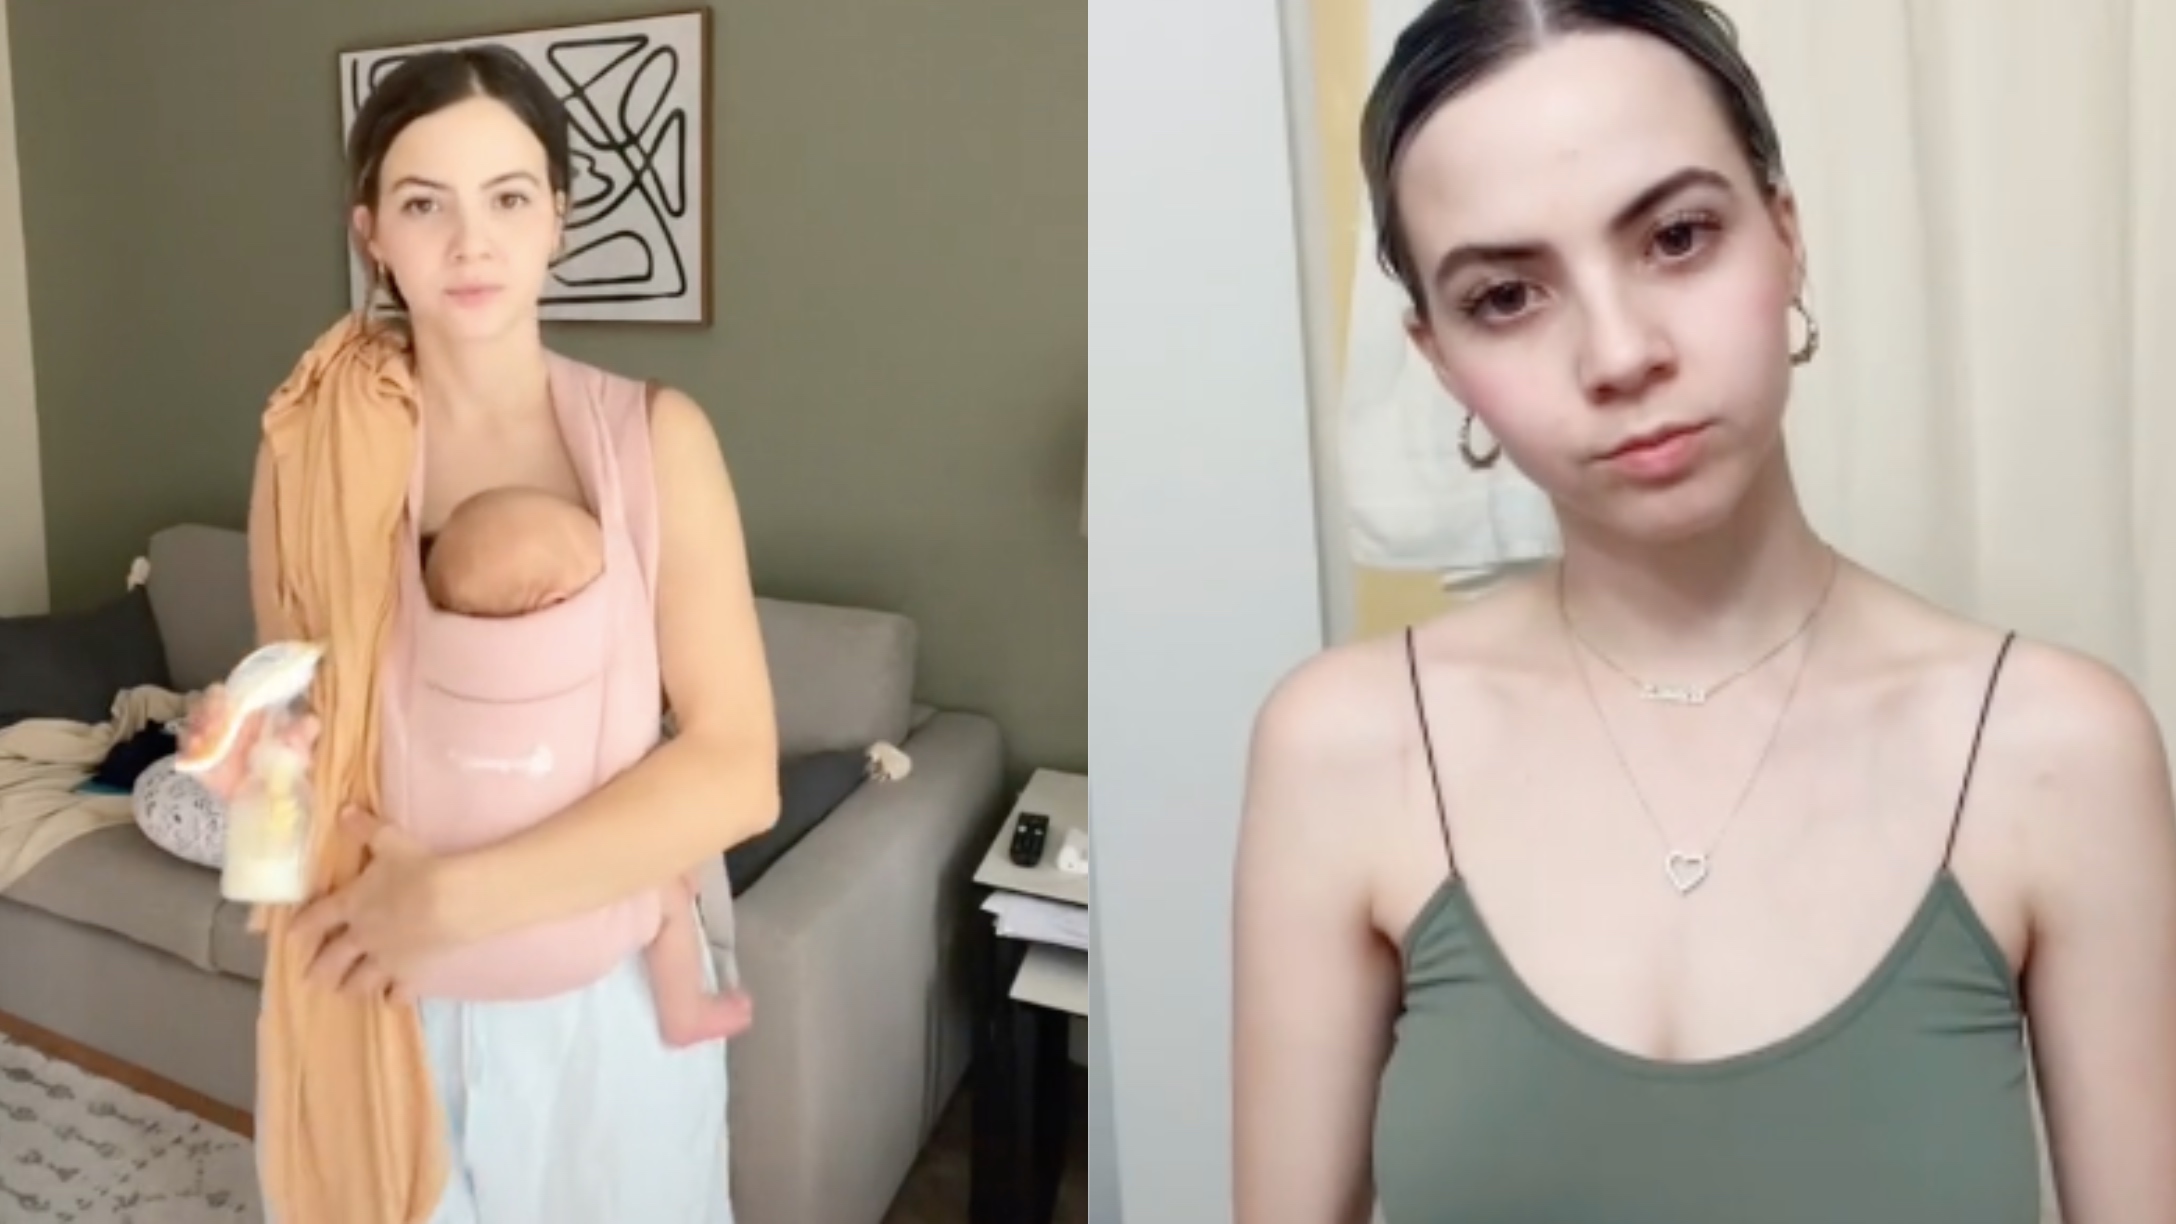 The Answer to Why Boobs Are Lopsided